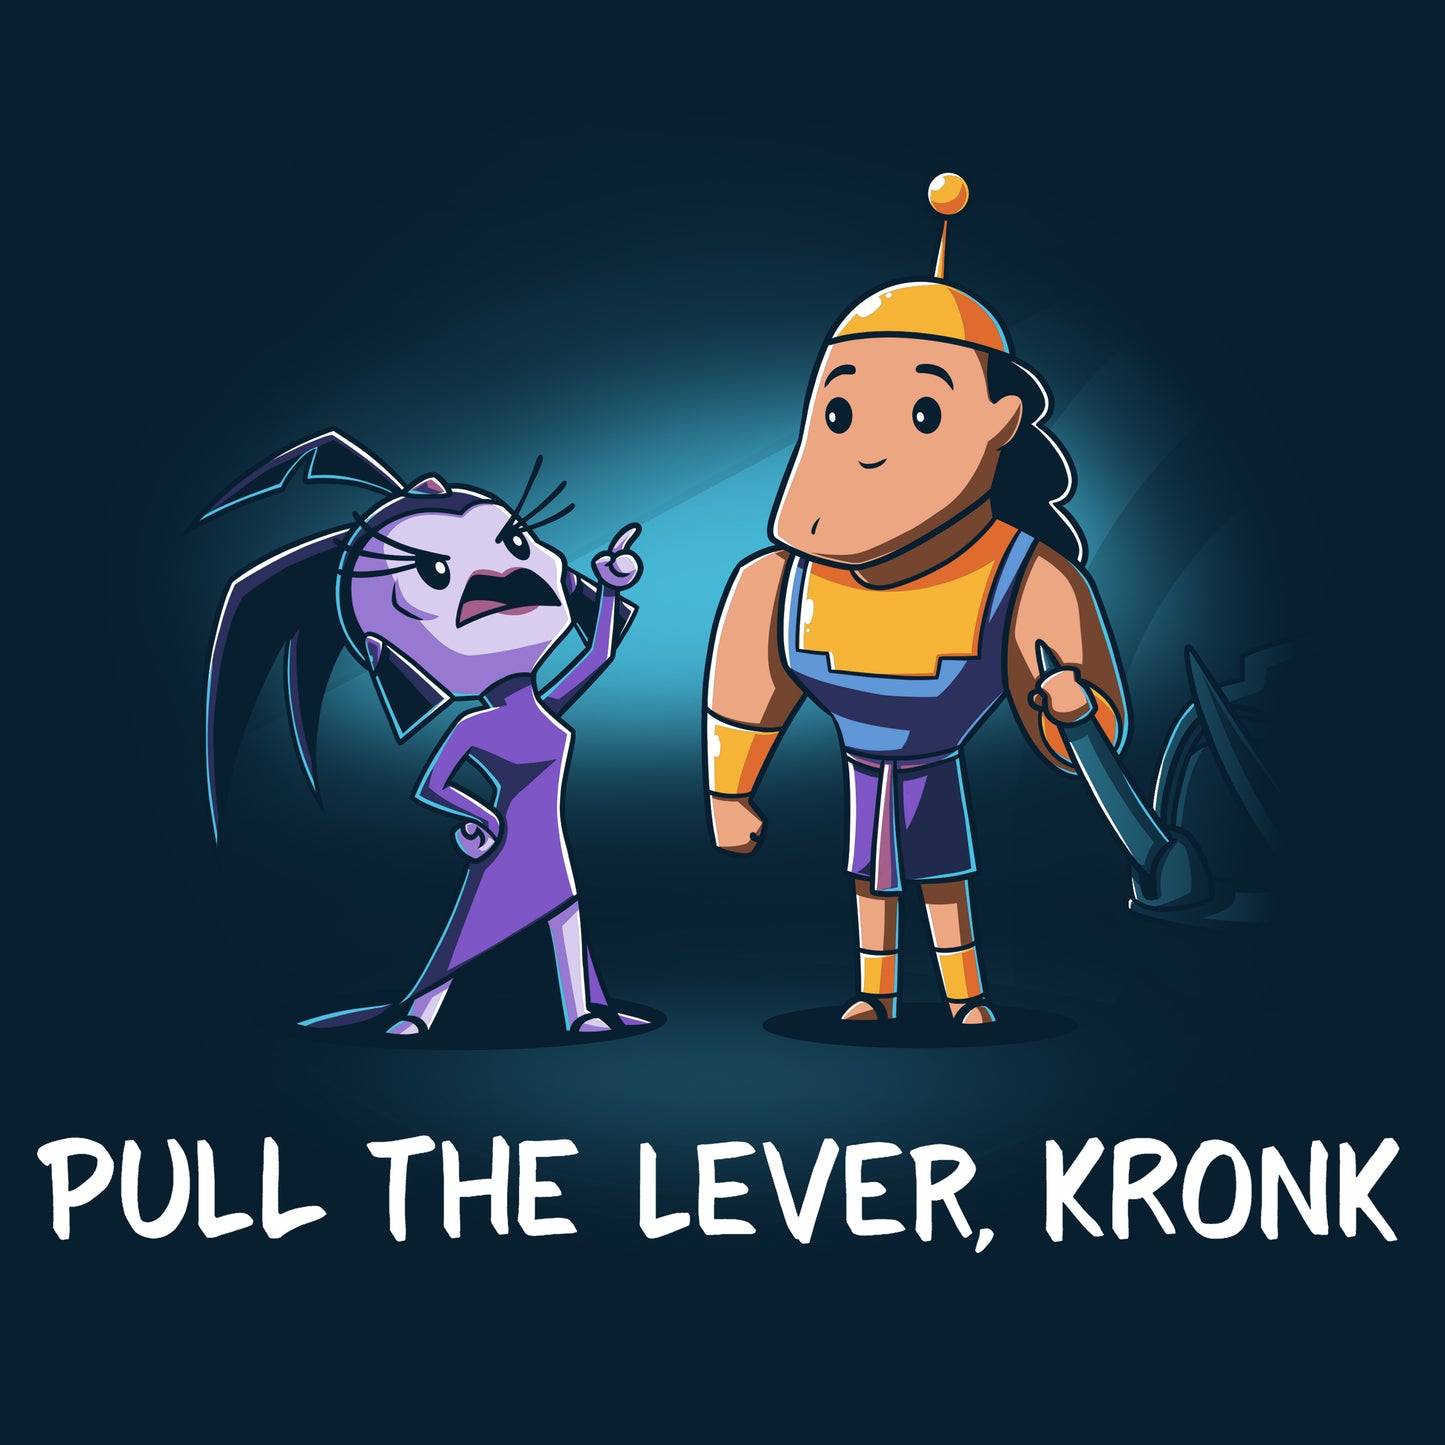 Officially Licensed Disney merchandise featuring Pull the Lever Kronk from Disney.